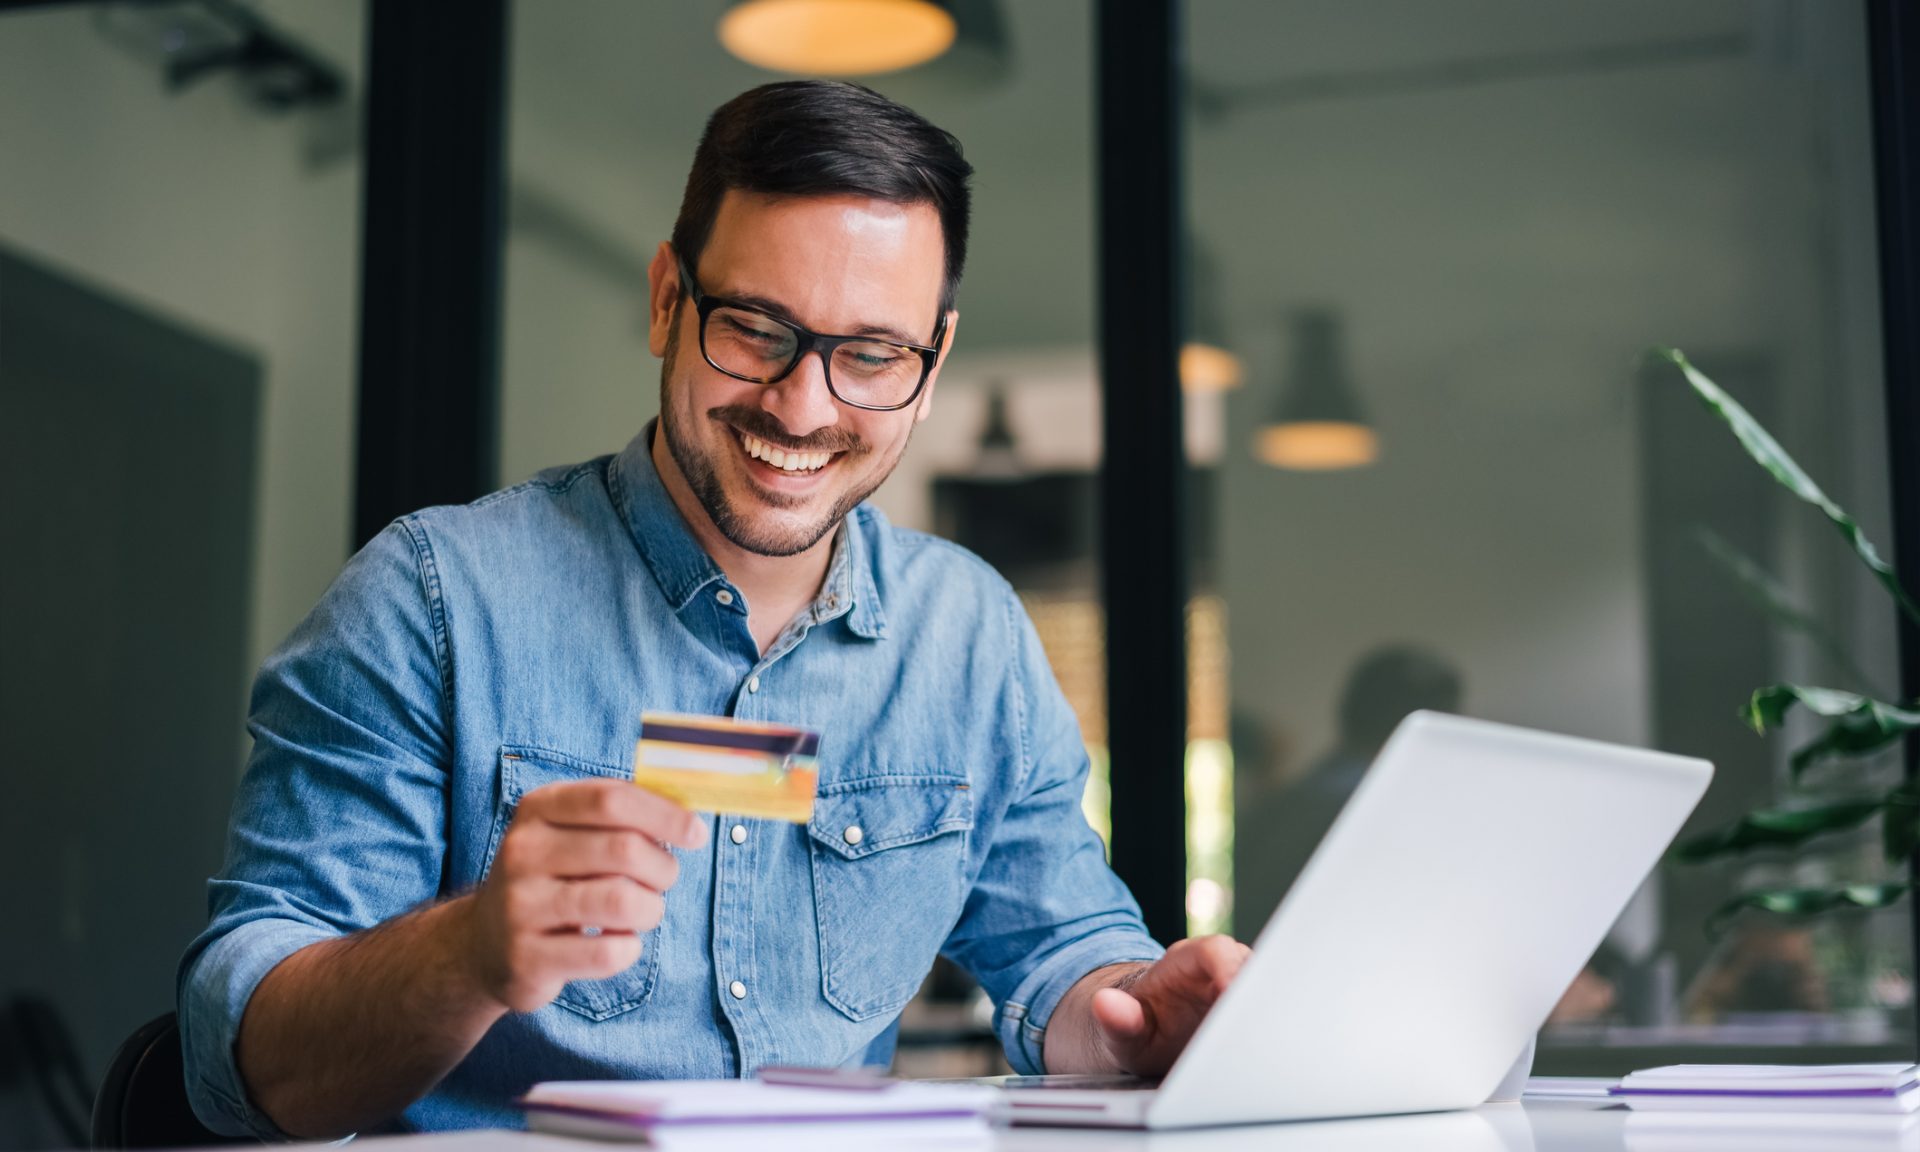 When Is the Best Time to Pay My Credit Card Bill? - NerdWallet